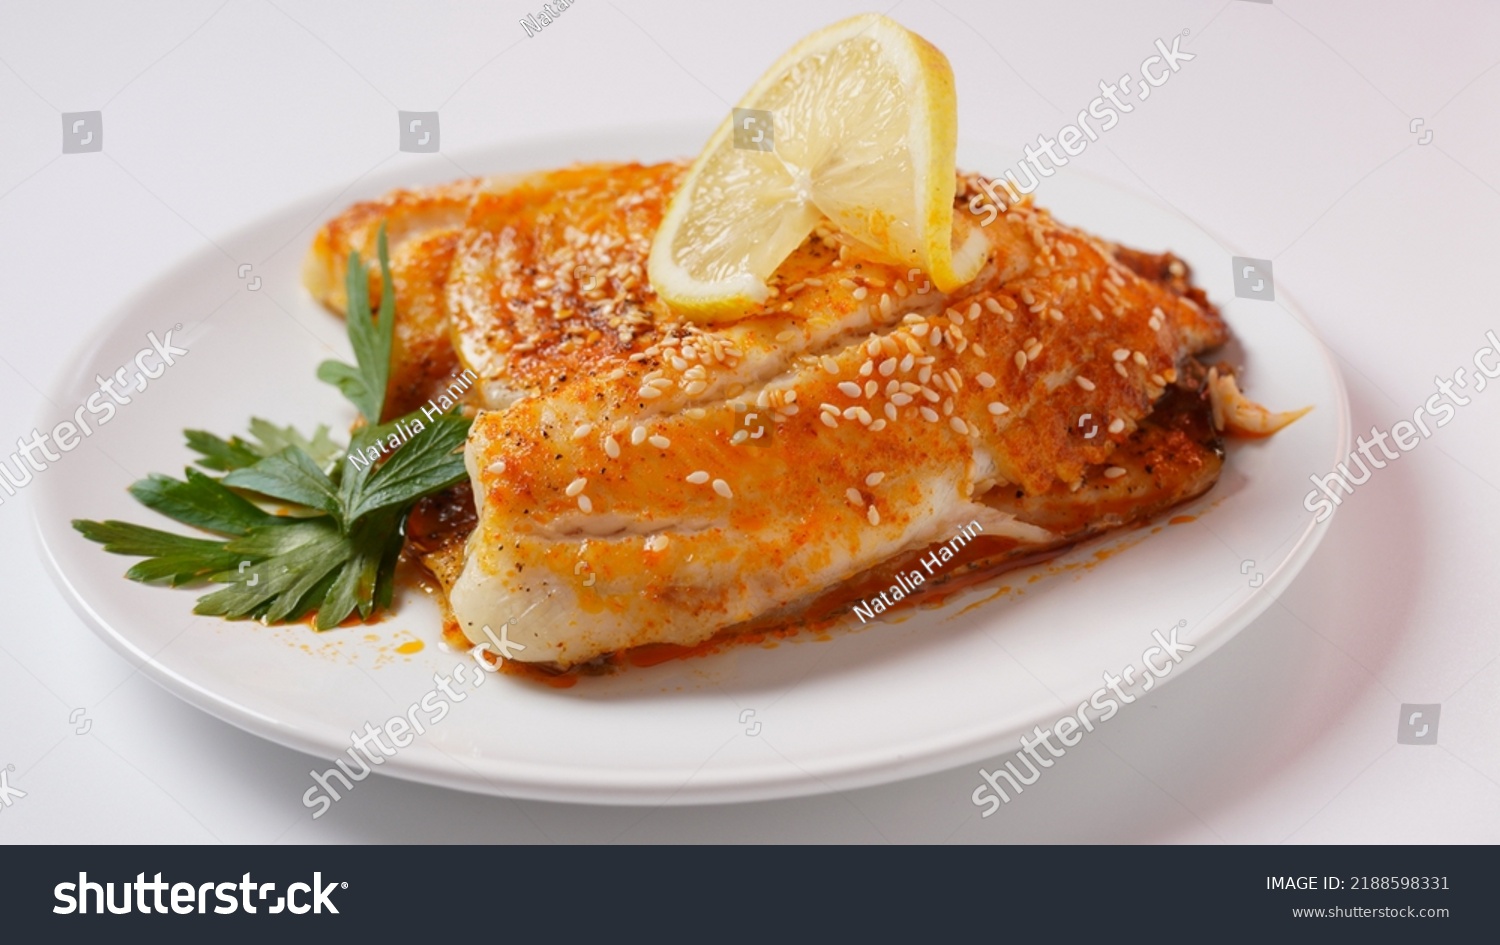 Fresh backed tilapia fillet on white plate with lemon and herbs #2188598331